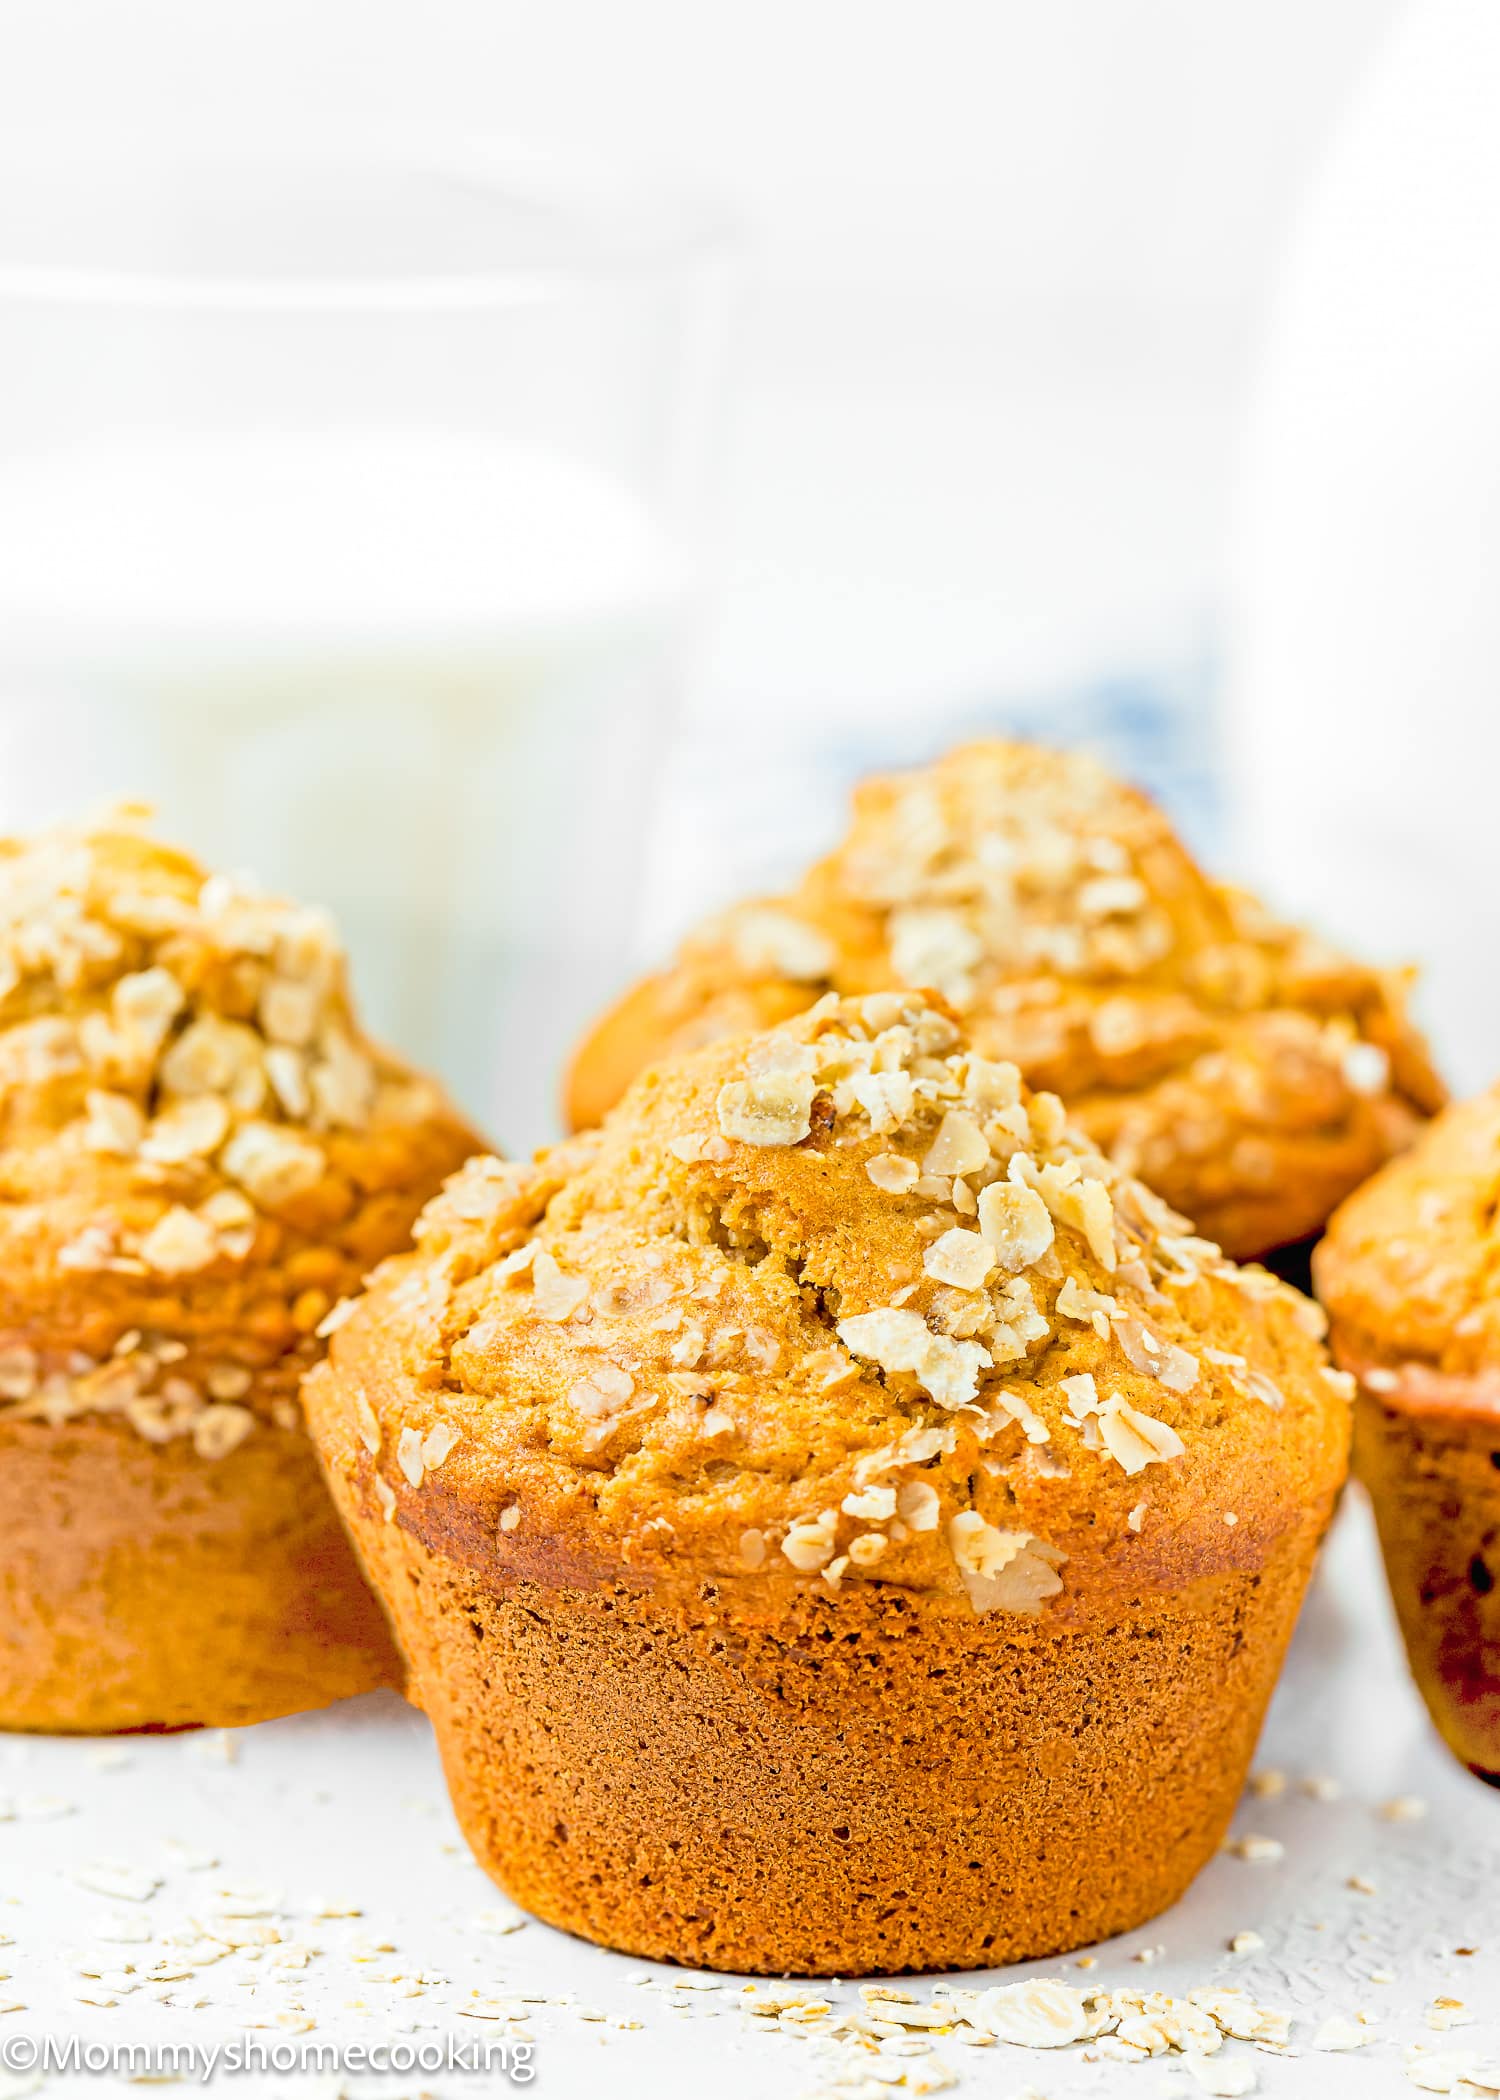 Moist easy Vegan oat muffins with oats and no sugar, served with a glass of milk.